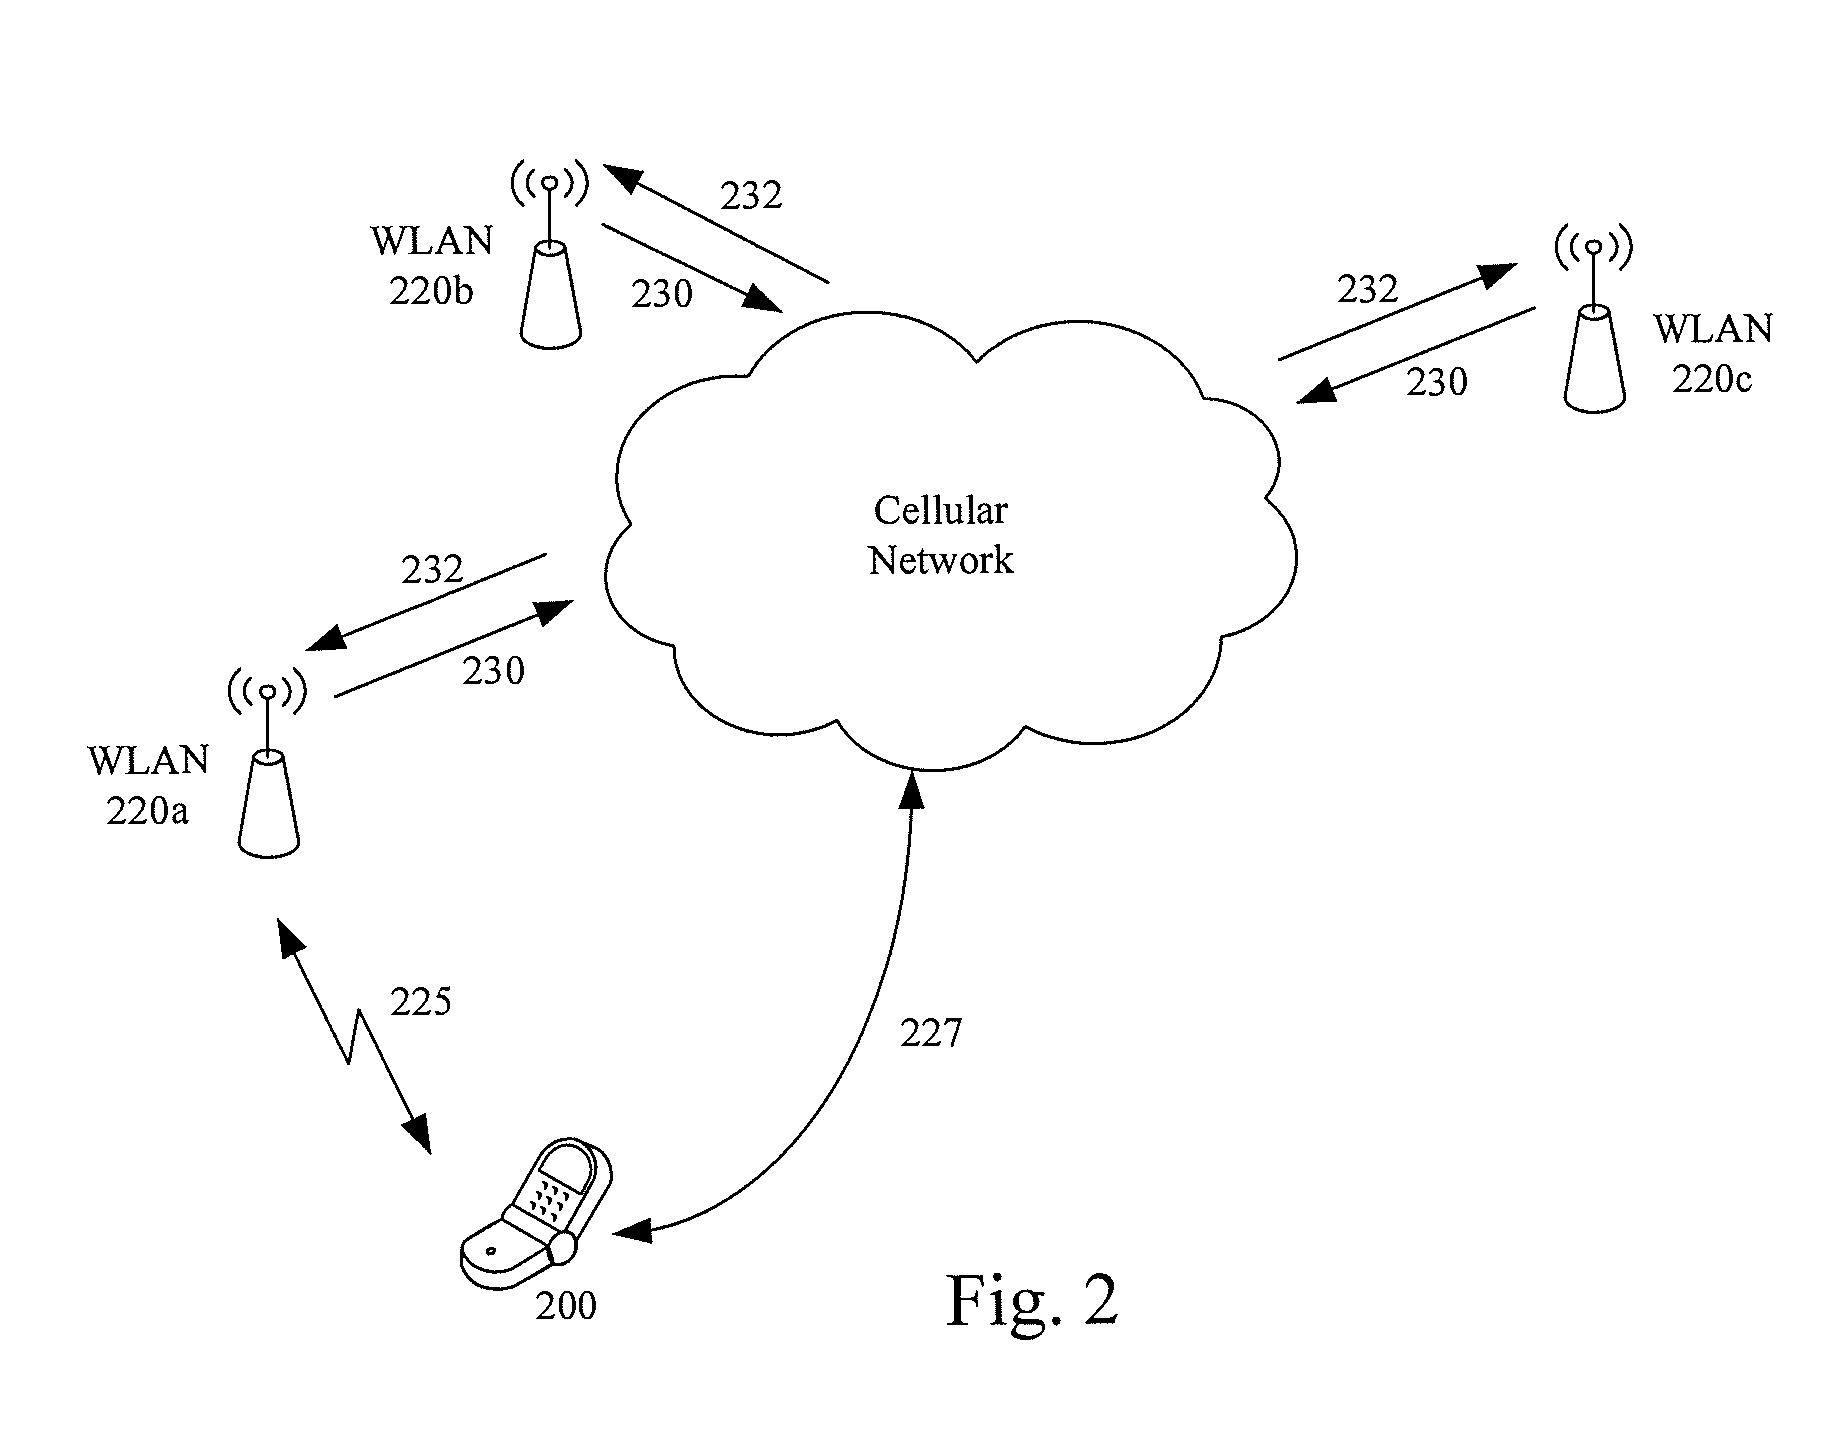 Certificate based authentication authorization accounting scheme for loose coupling interworking